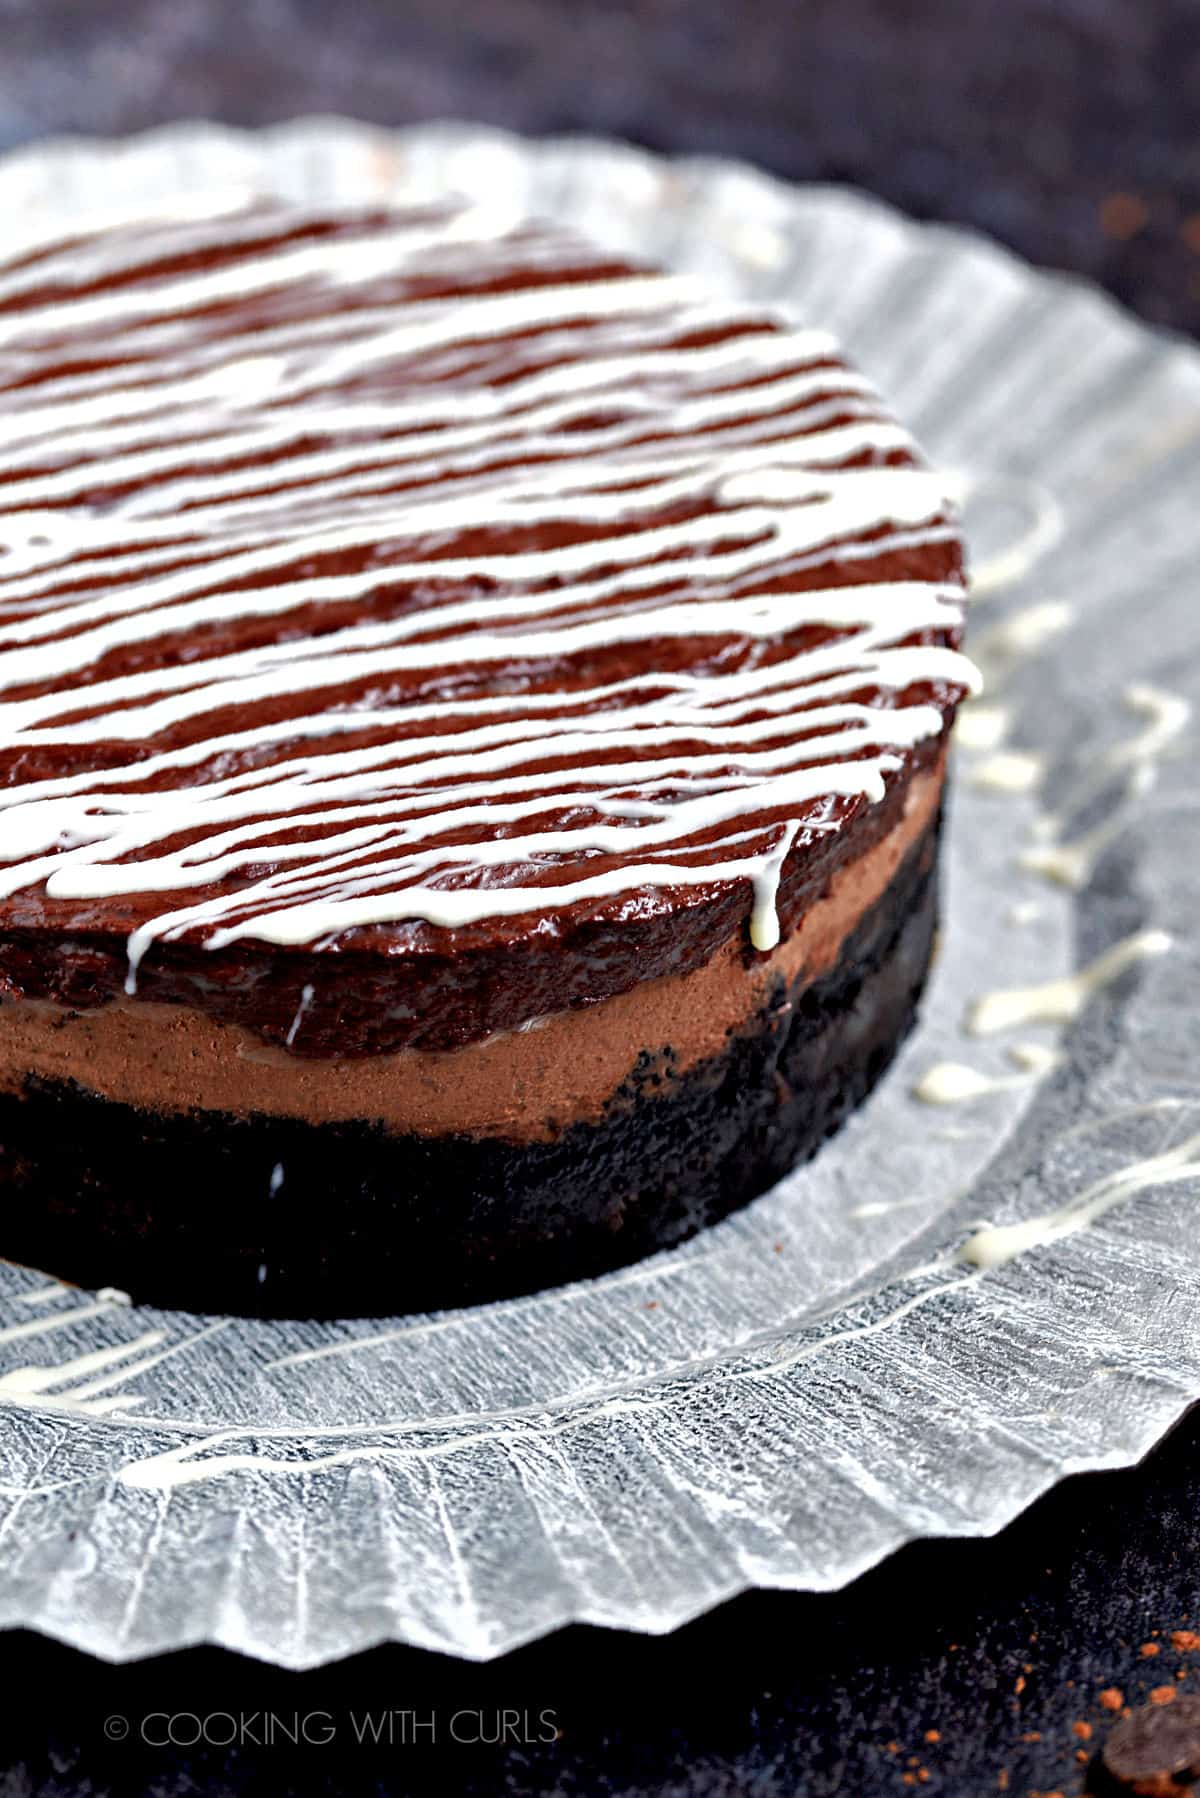 White chocolate drizzled over a chocolate cheesecake sitting on a ruffled metal serving platter.